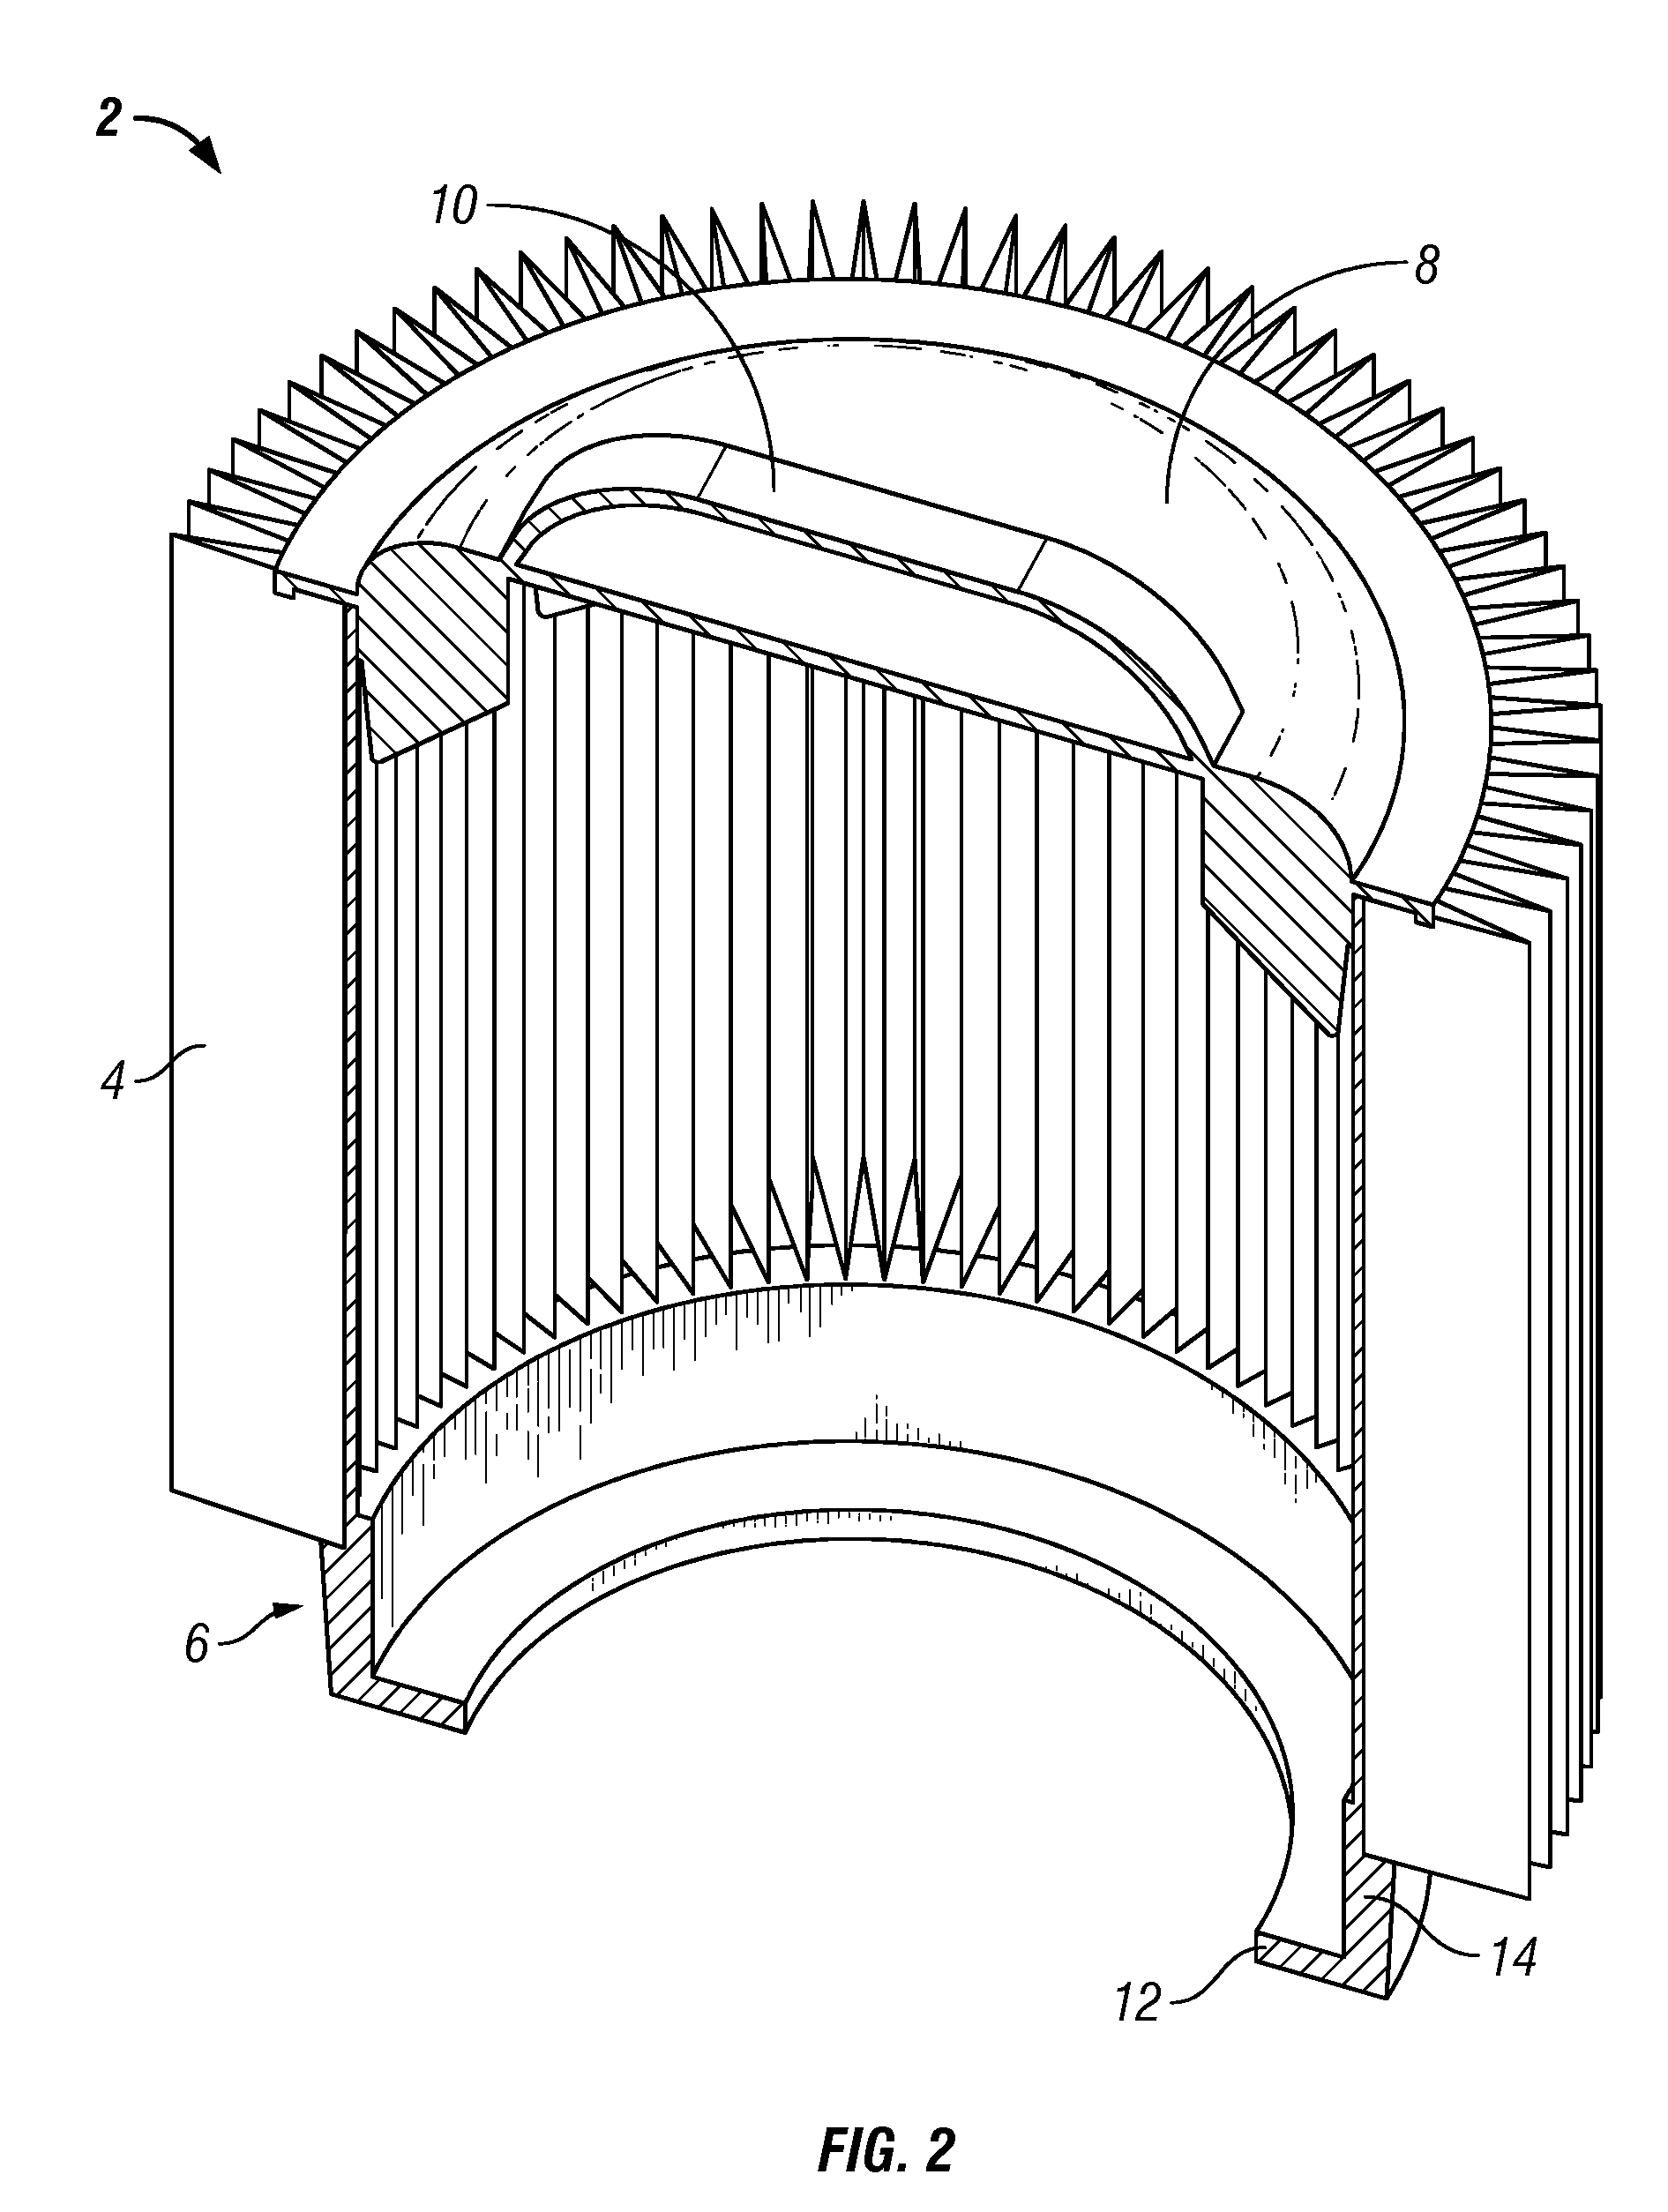 Filter and system for improved sealing and ease of attachment on a vacuum cleaner